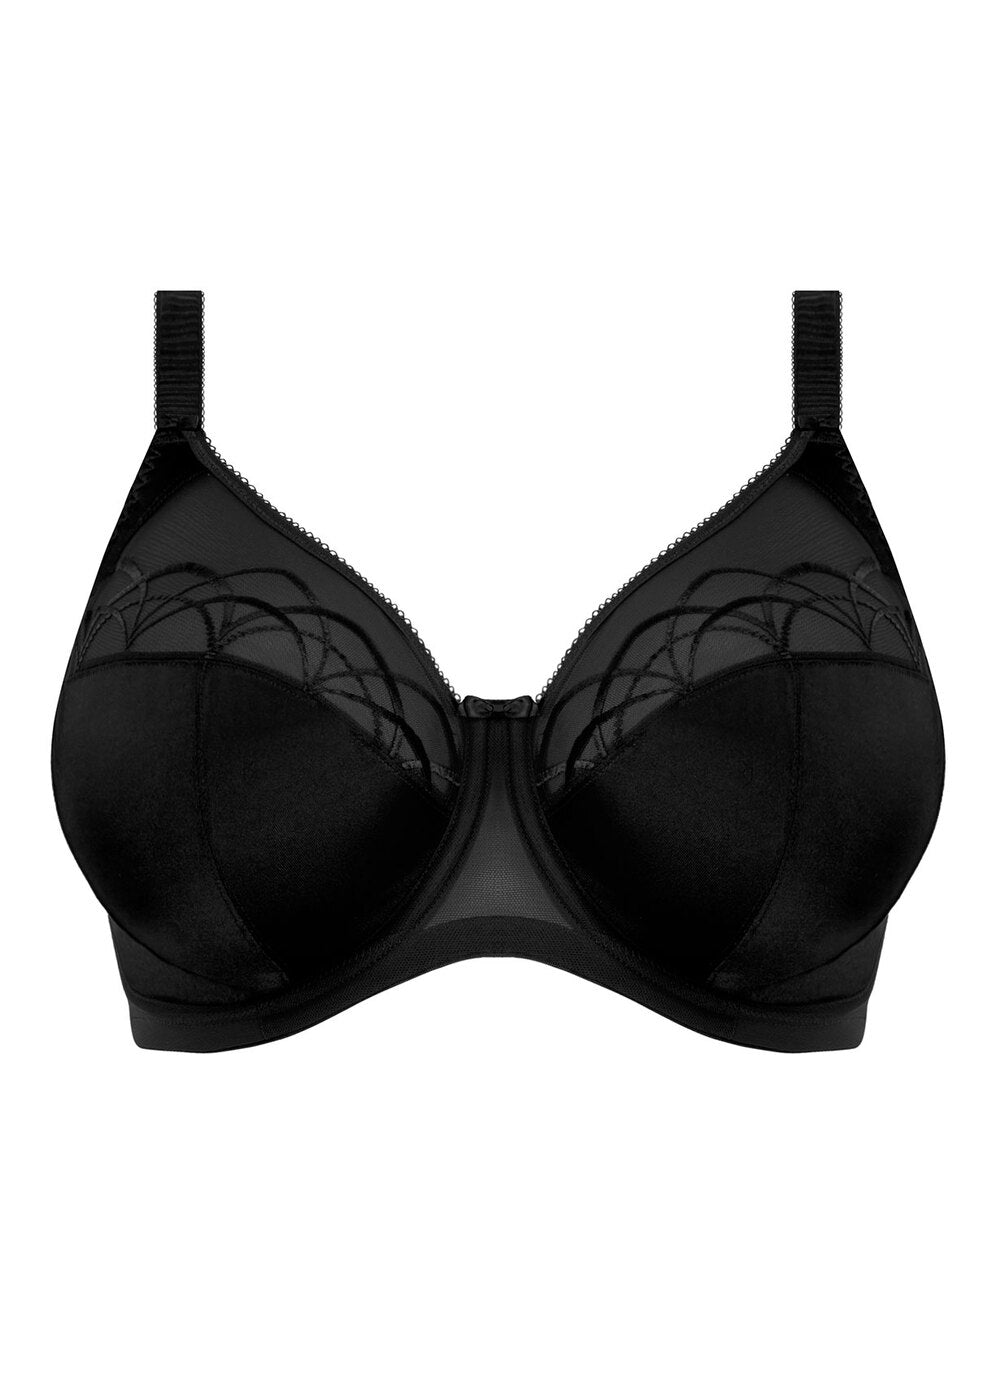 Elomi Cate Full Cup Banded Bra Black